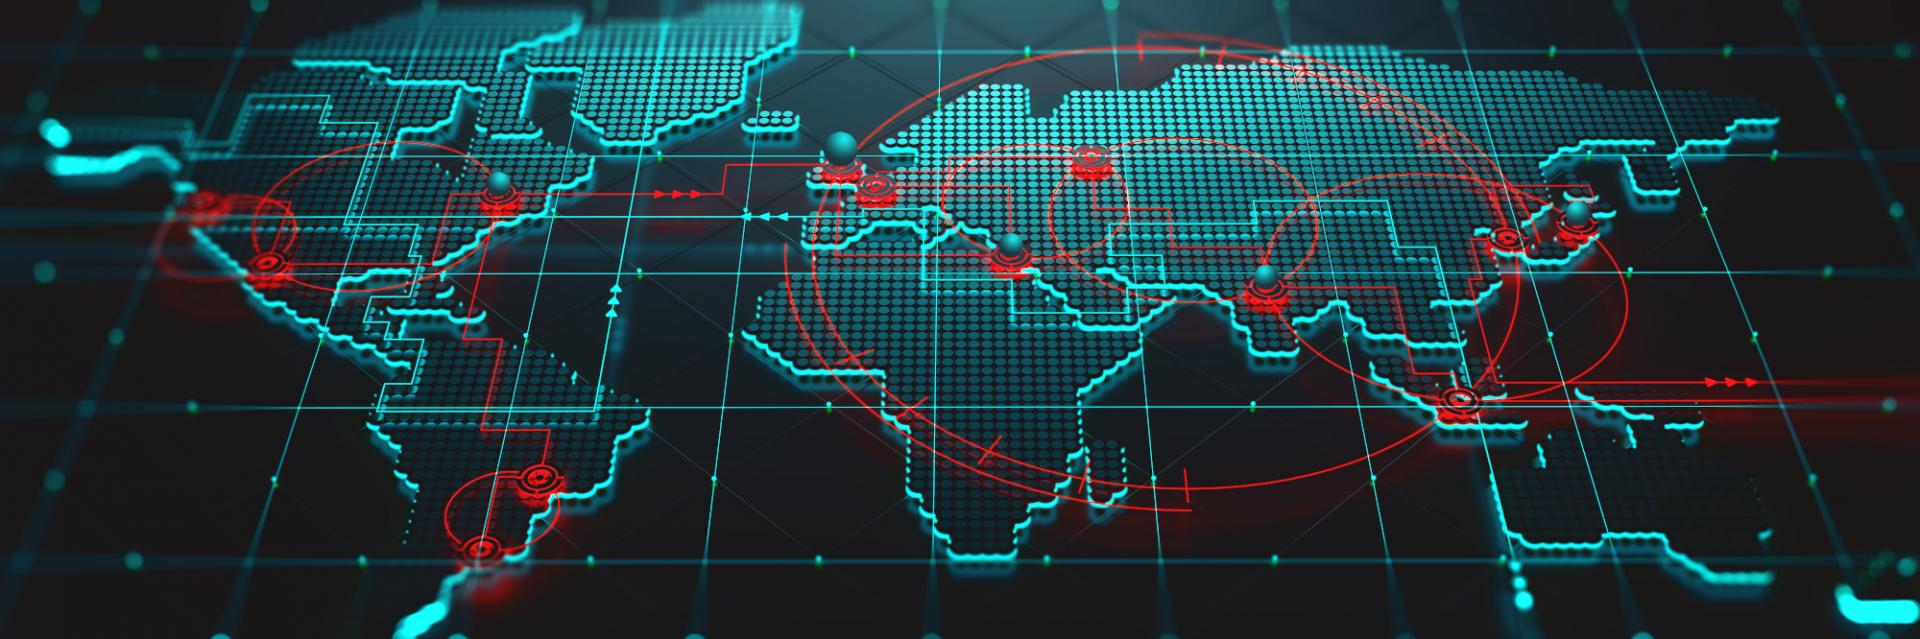 7 Views On How Technology Will Shape Geopolitics